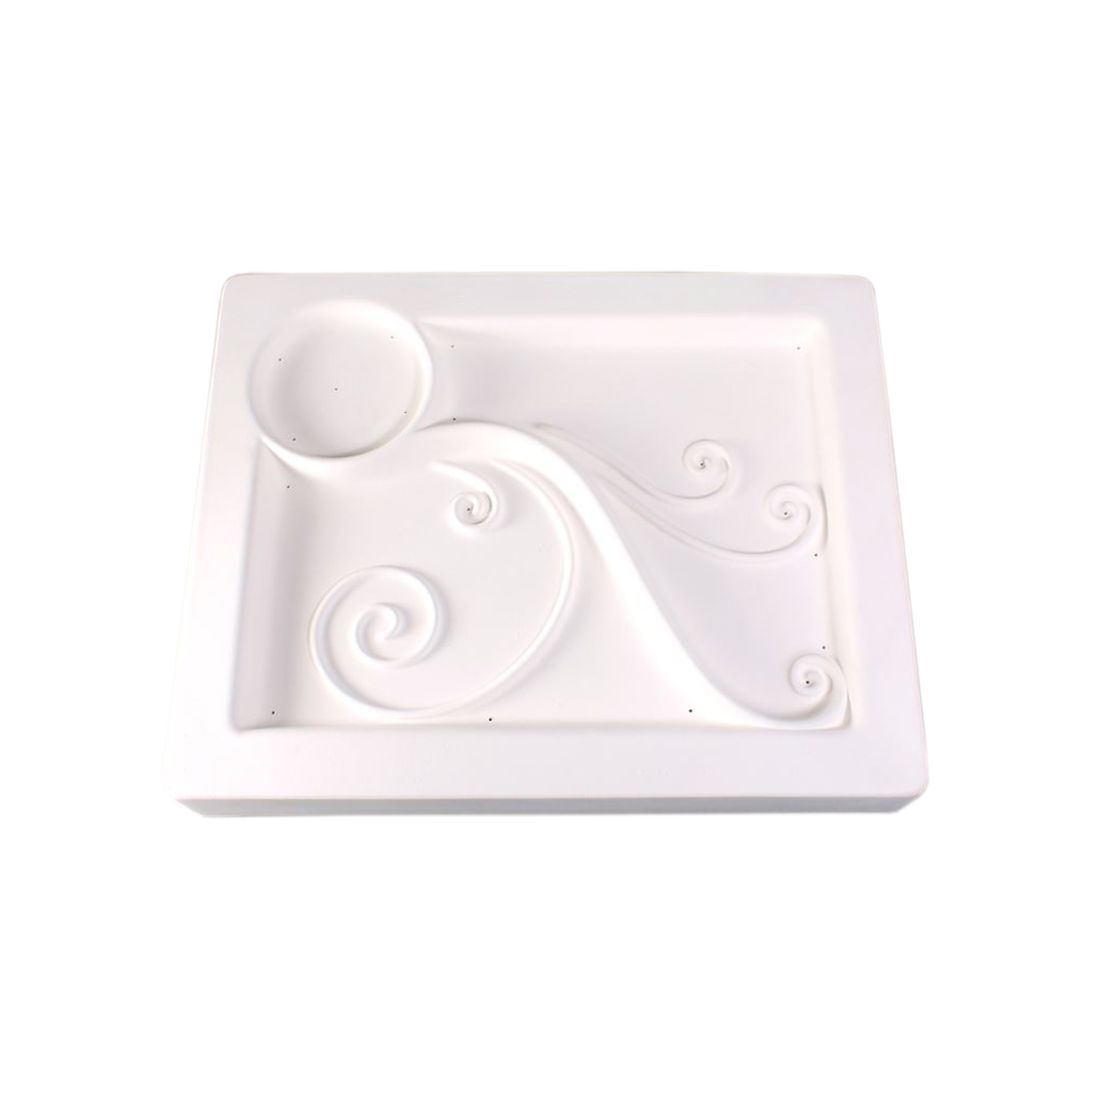 SPIRAL APPETIZER TRAY MOLD by CPI